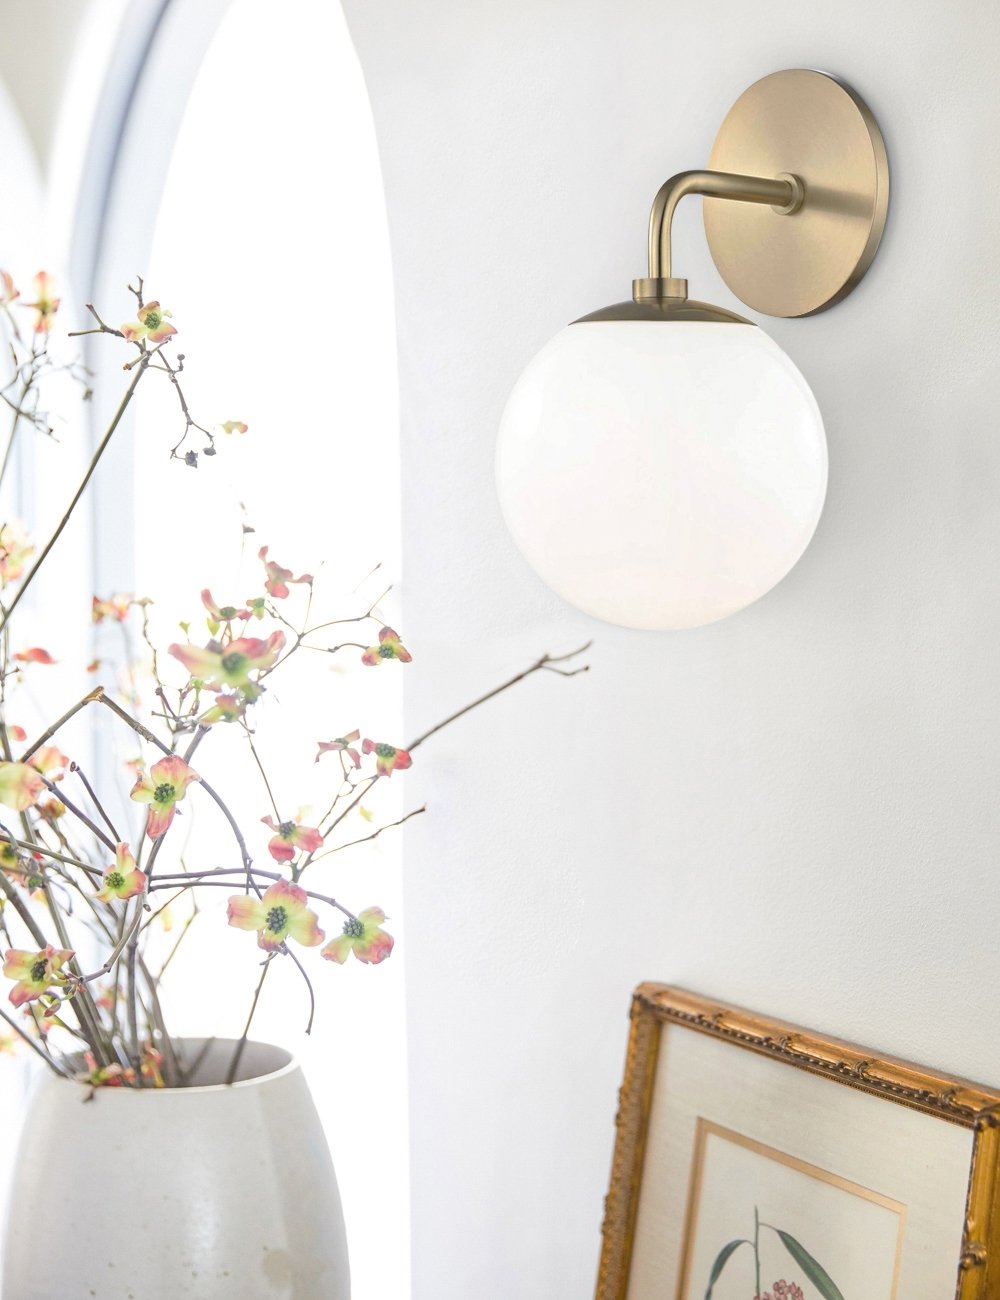 Go for a Glass Globe on a Gold Sconce